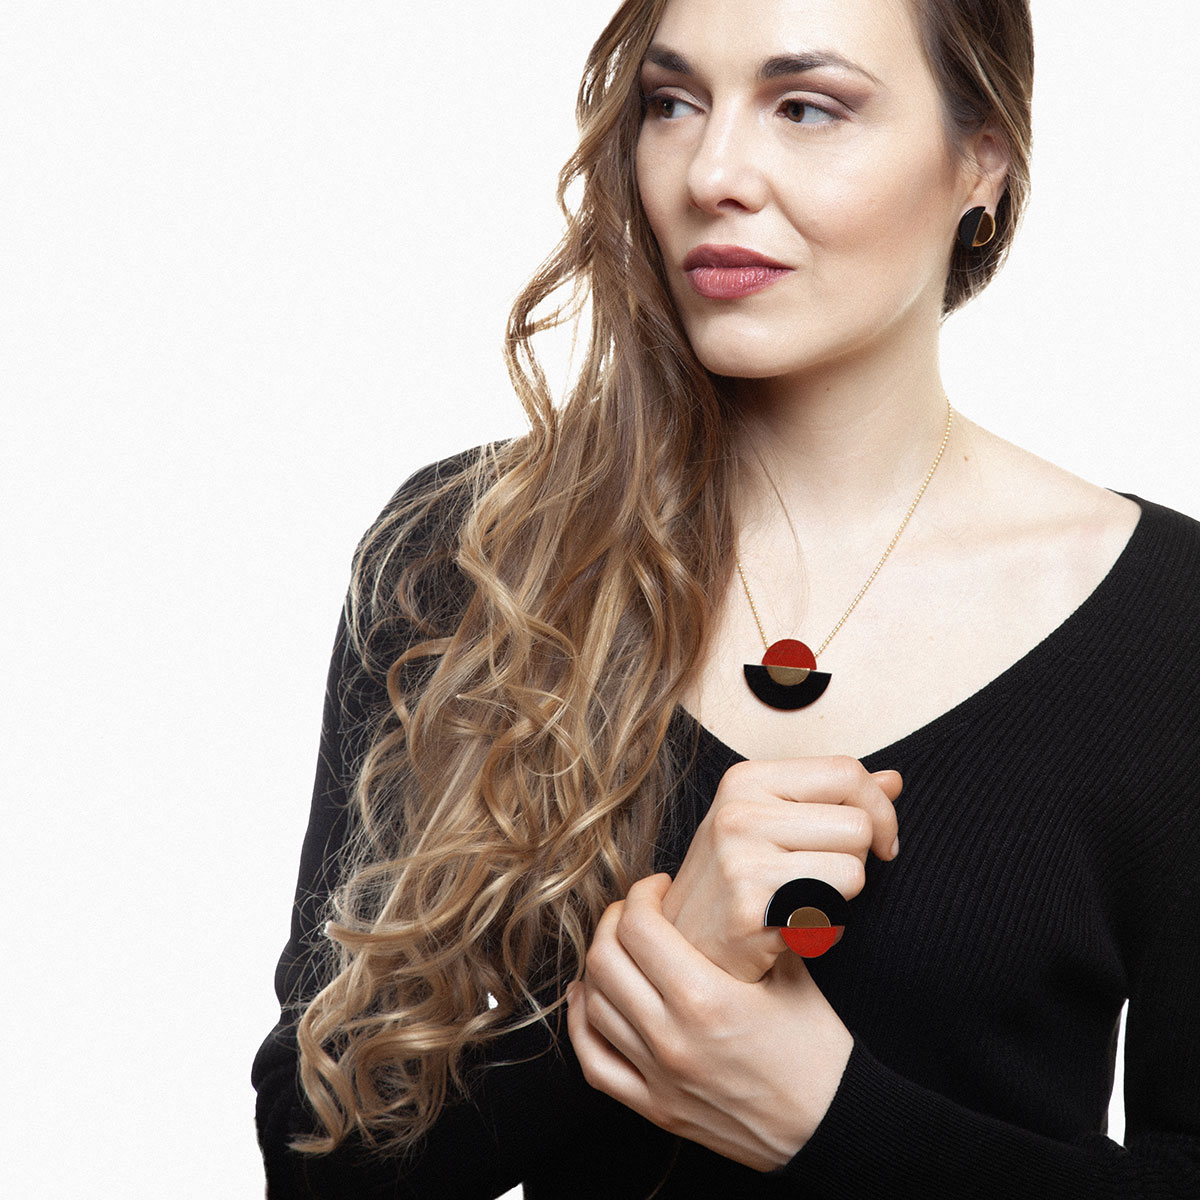 Zoe handcrafted ring in 9k or 18k gold, sterling silver, onyx and red rutilated jasper designed by Belen Bajo m2